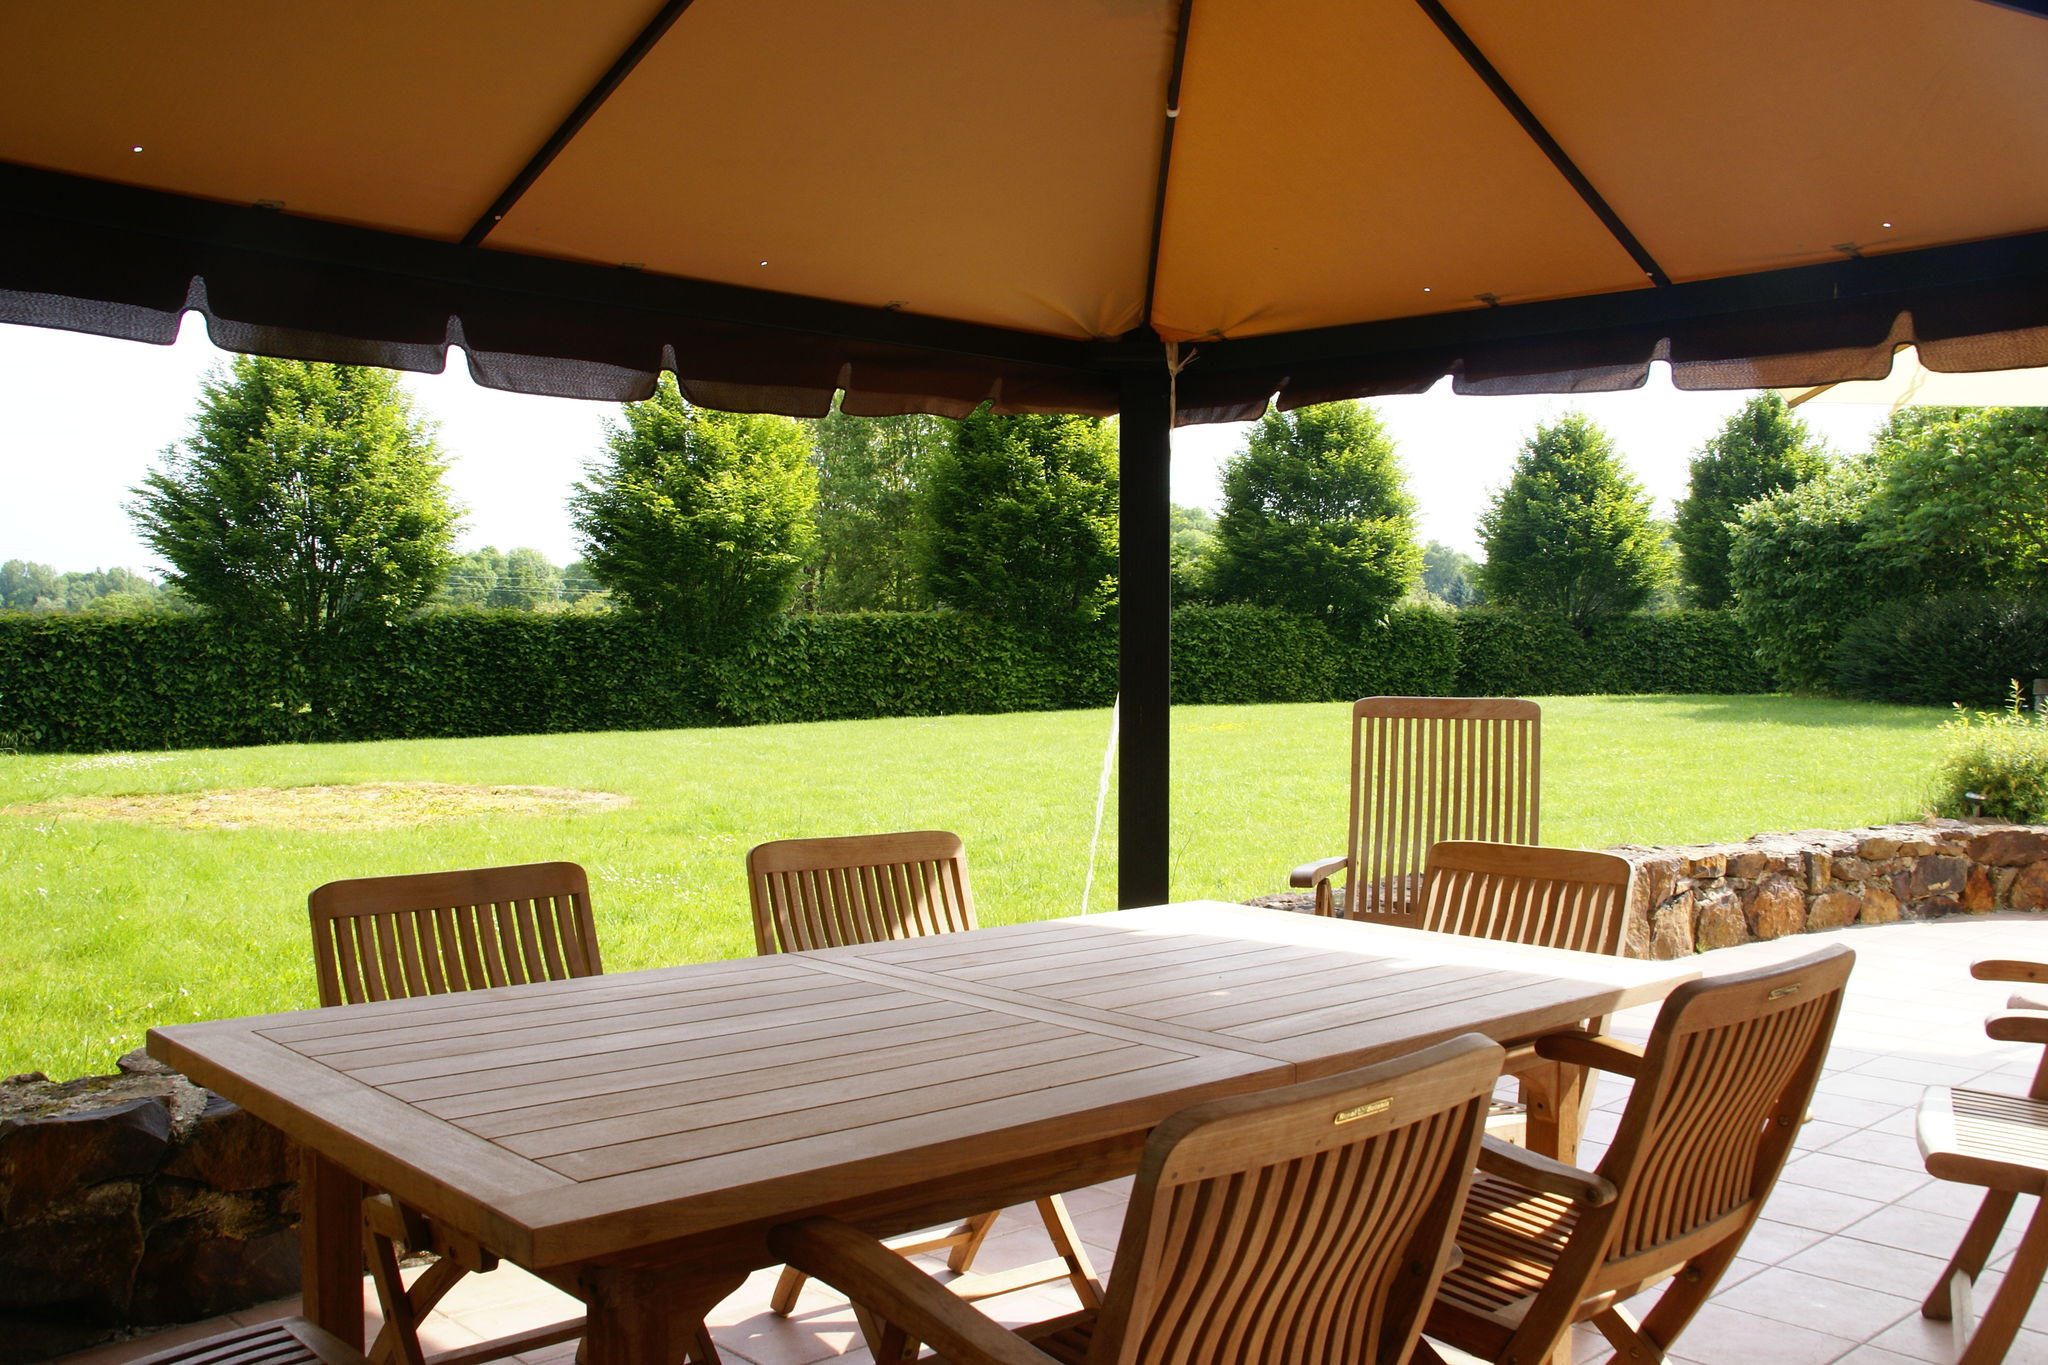 Authentic Burgundy holiday home with plenty of space and privacy, near Diges